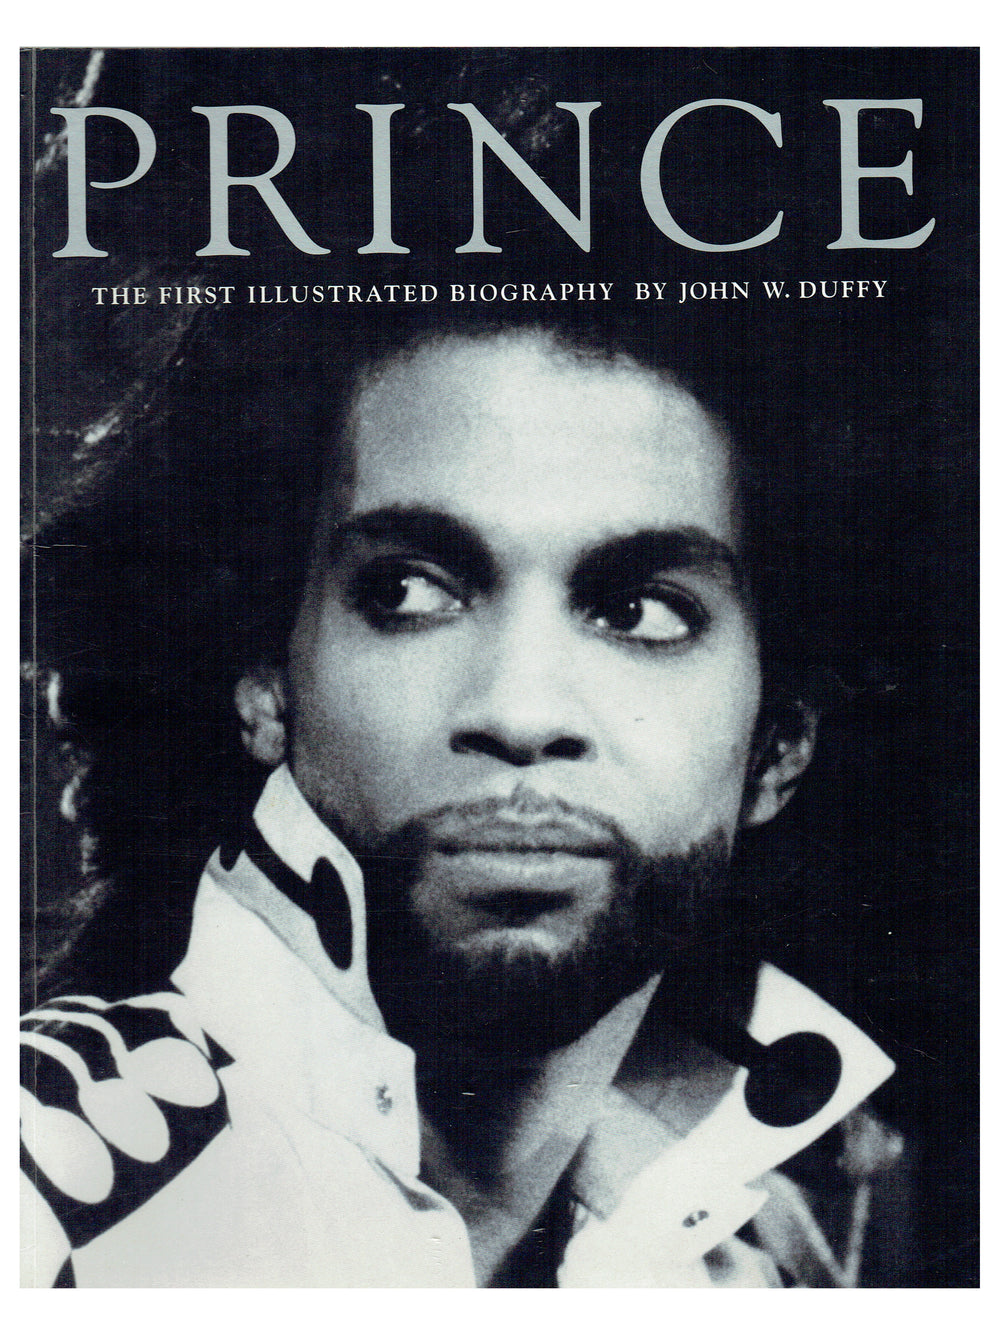 Prince Illustrated Biography Paperback Softback Book 110 Pages John W Duffy